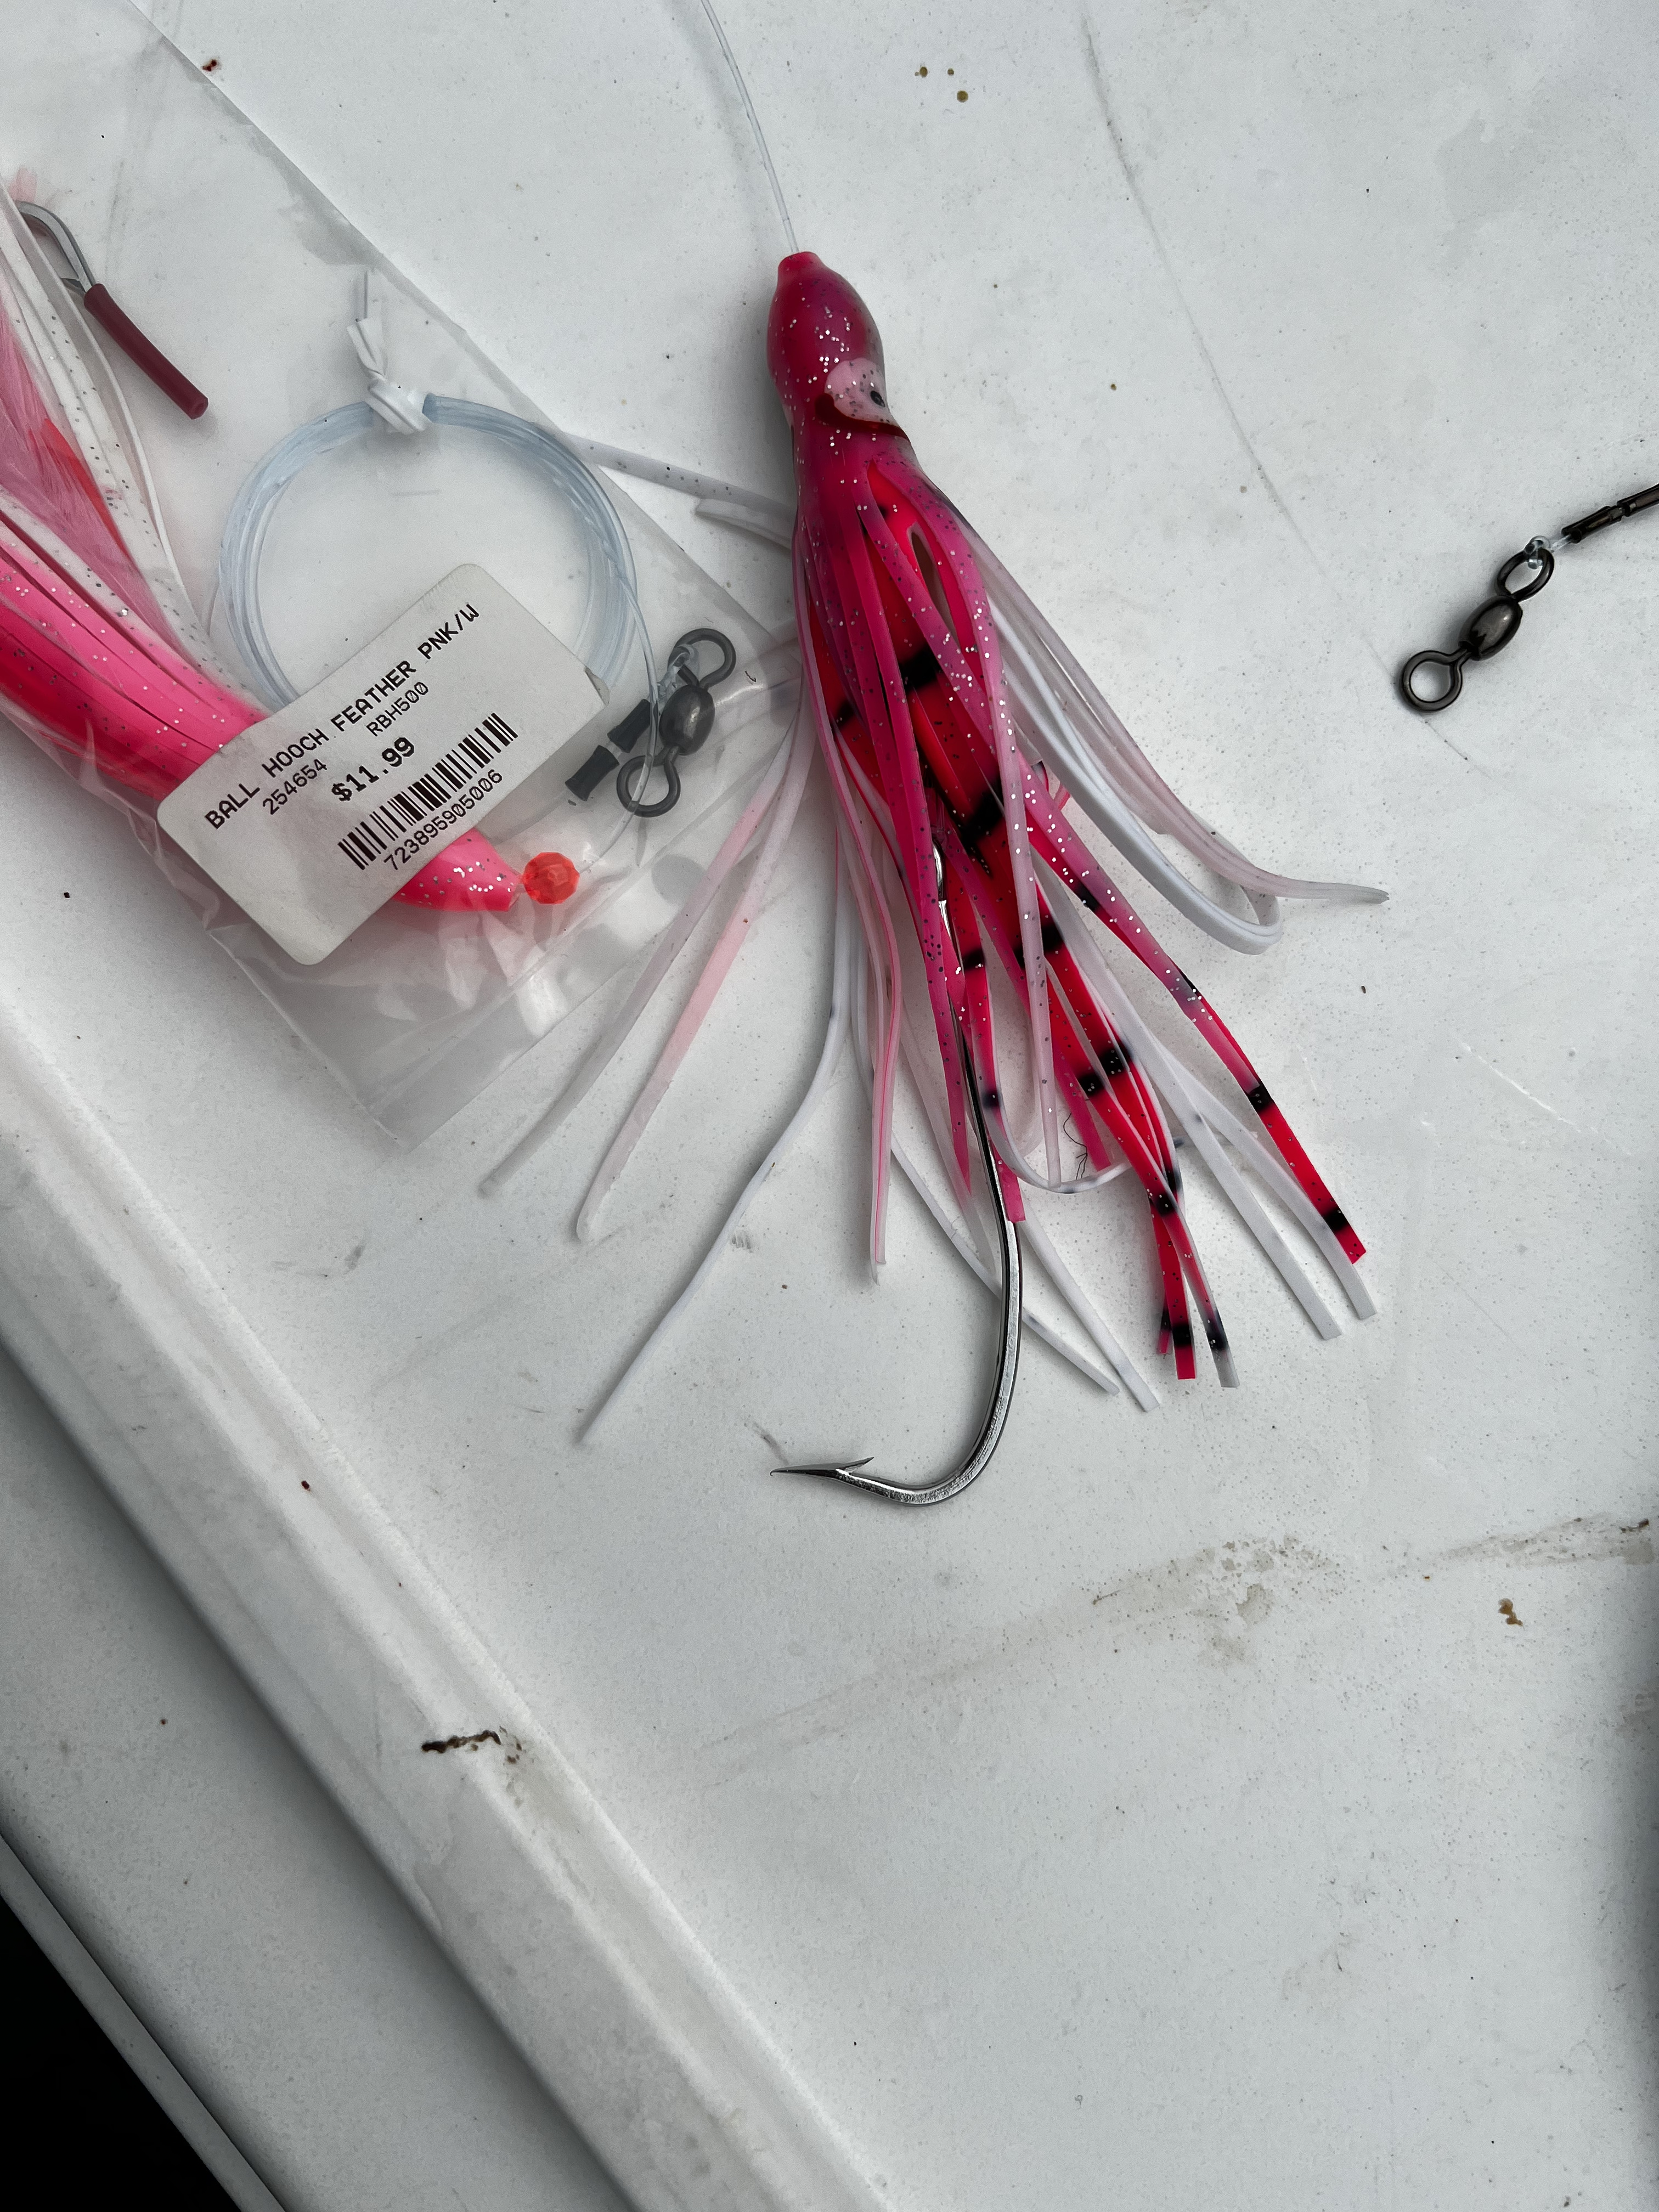 Hooks for Handlines for Tuna - That don't bend